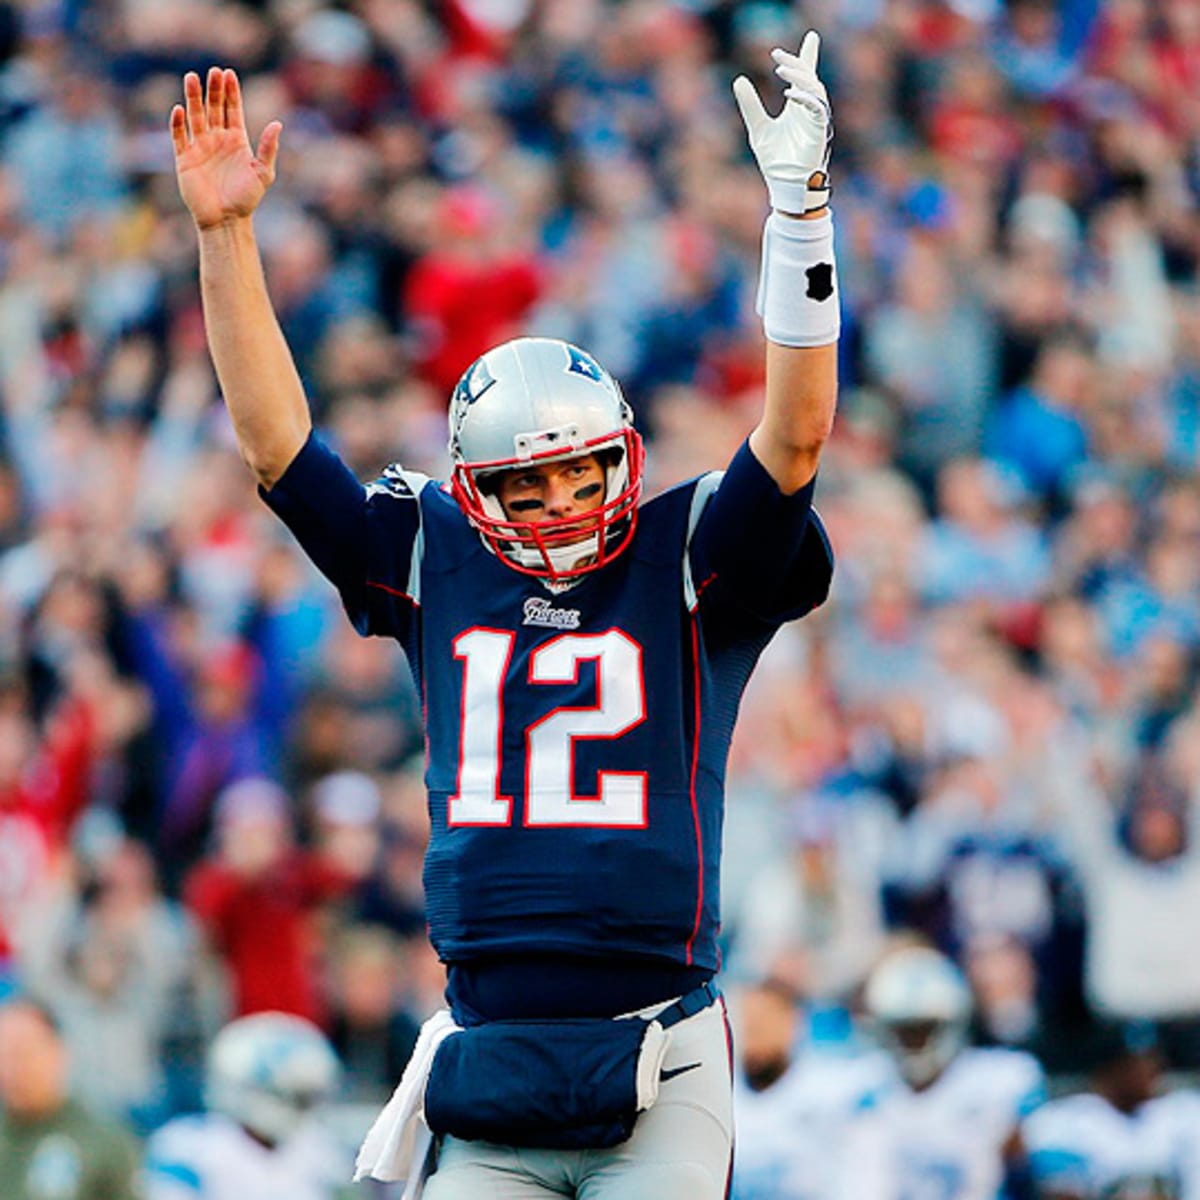 How long has Tom Brady been in the NFL? Years, age of Patriots QB